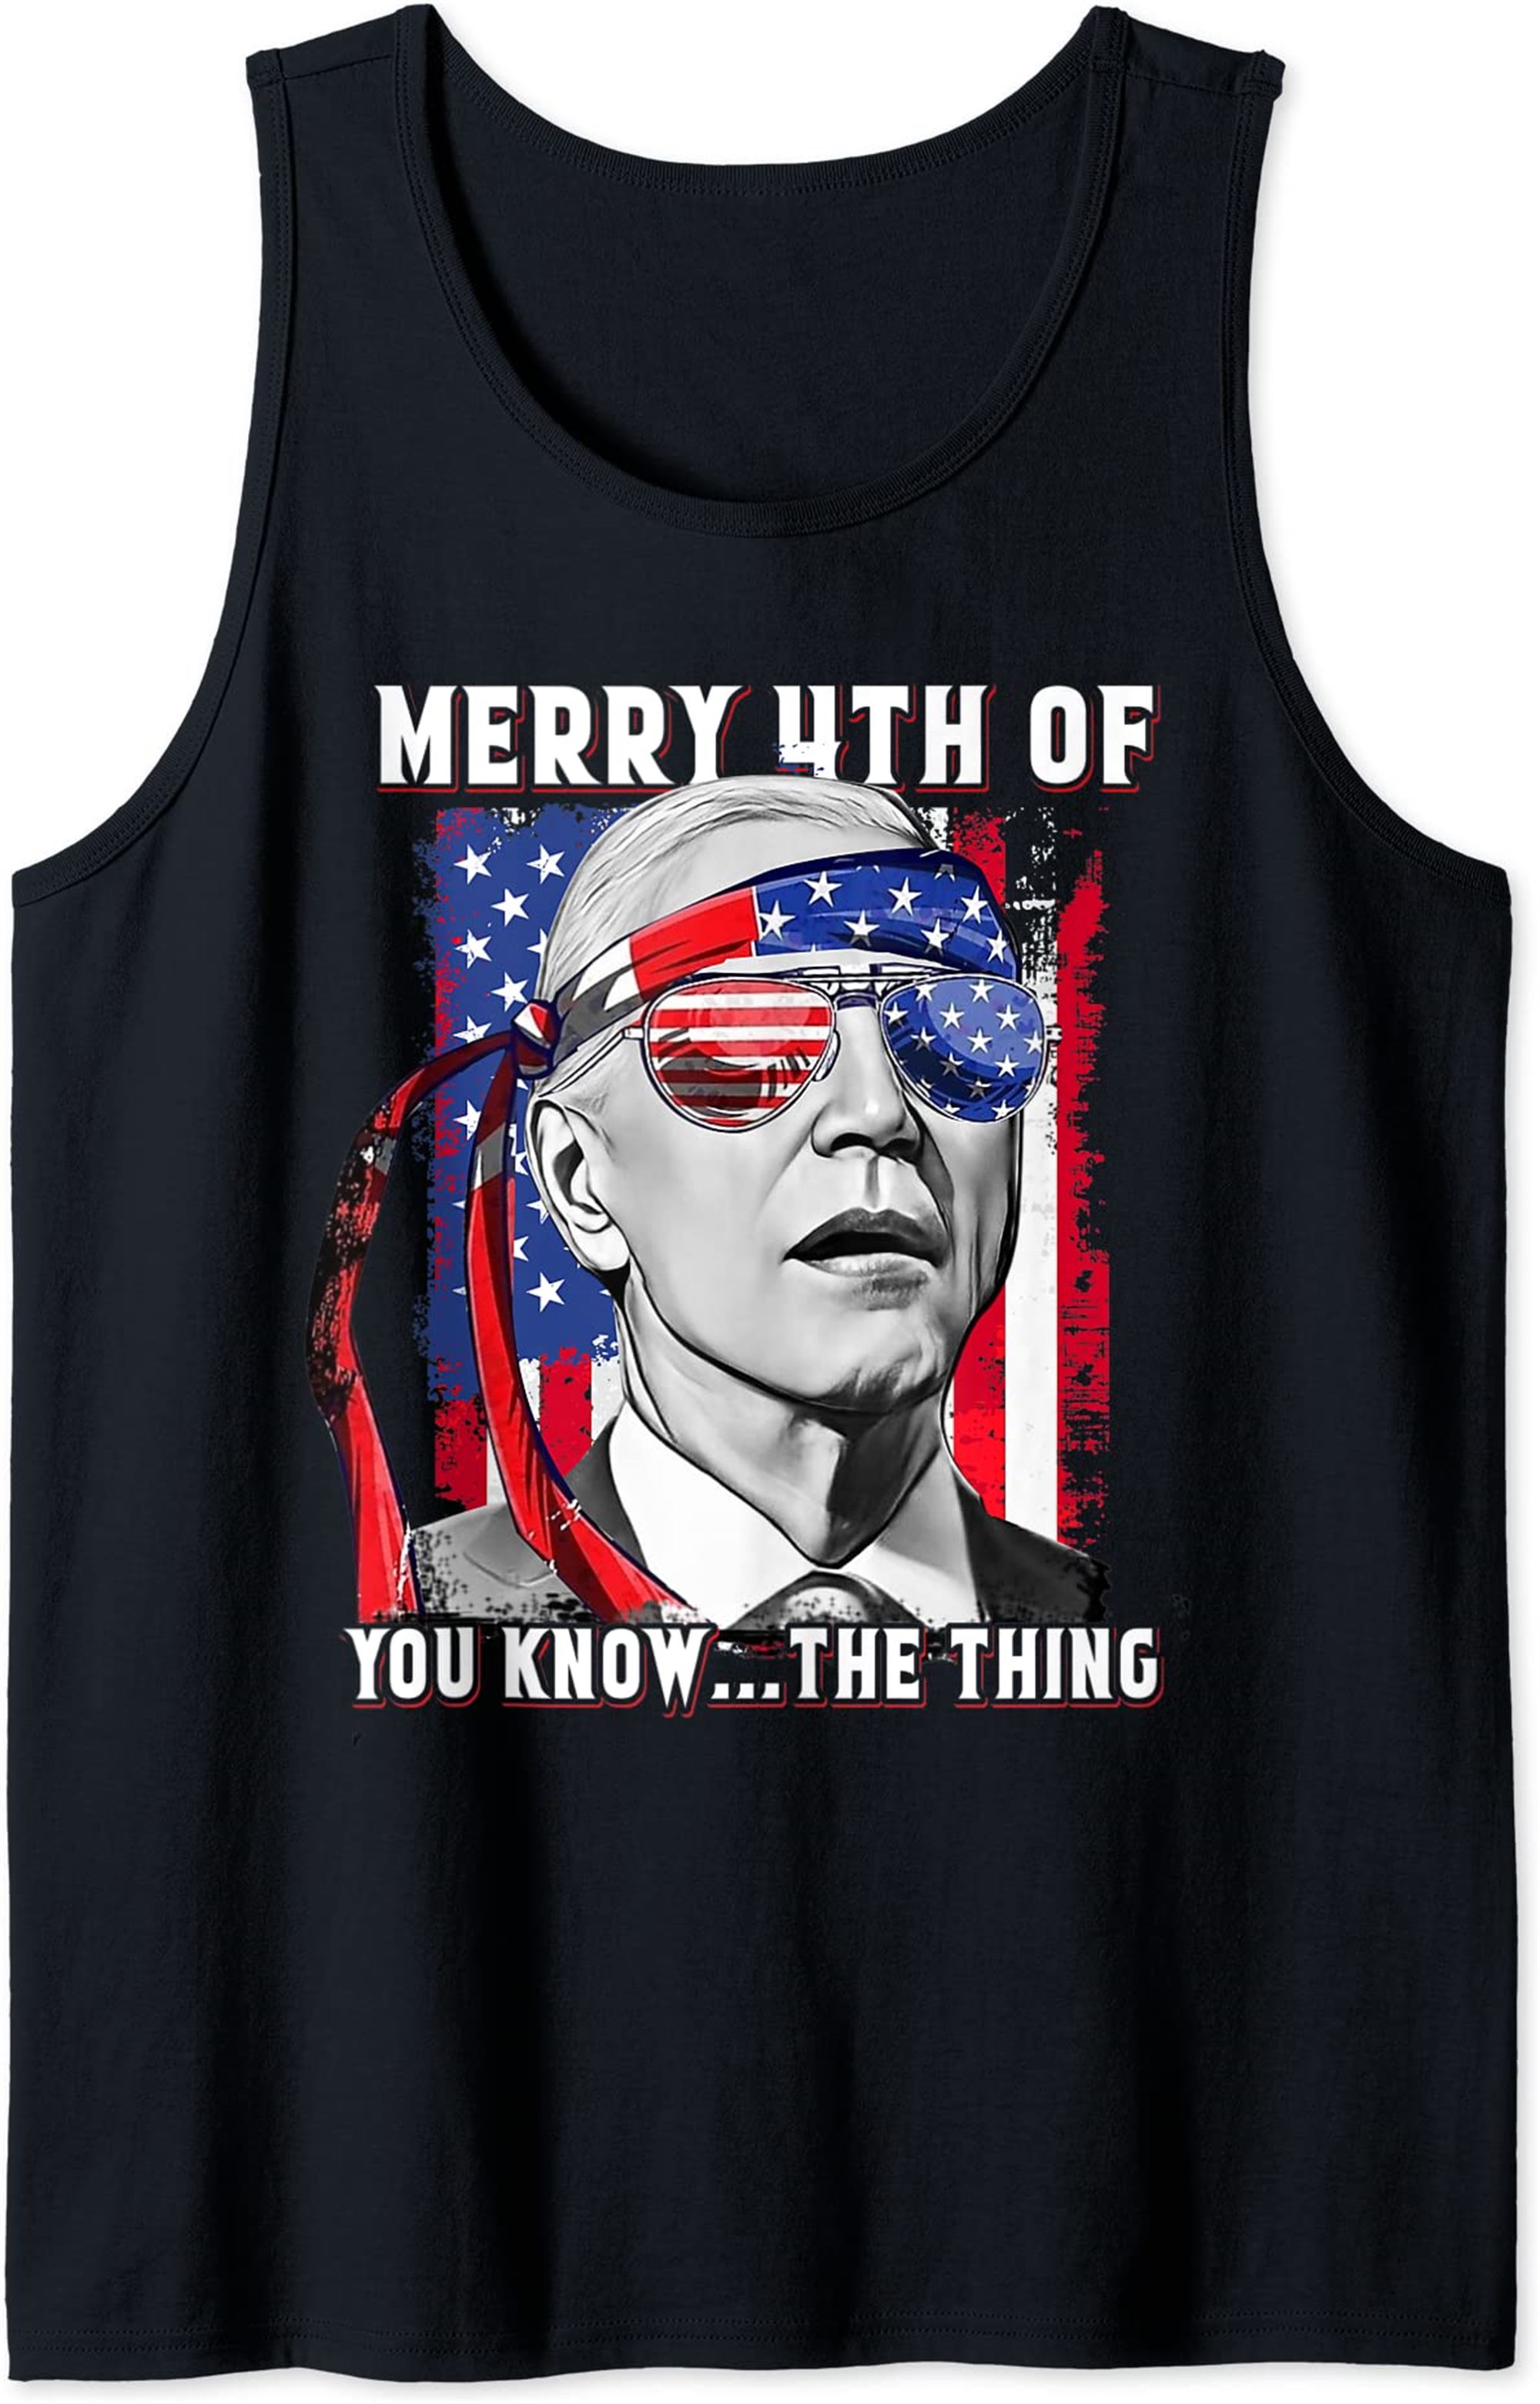 Merry 4th Of You Knowthe Thing Happy 4th Of July Memorial Tank Top Plus Size Up To 5xl